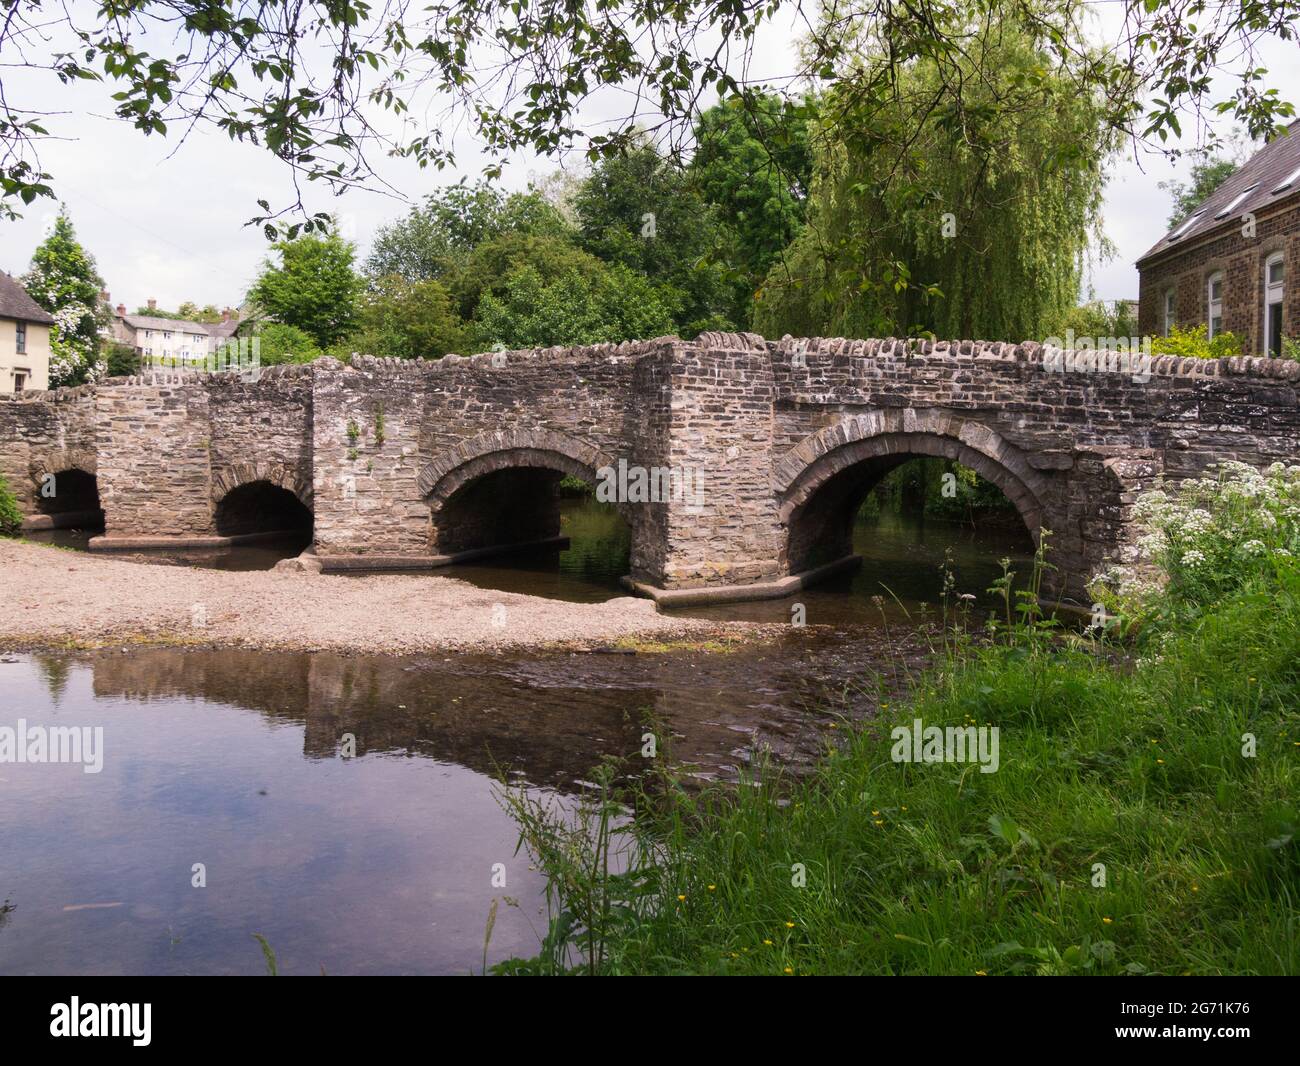 14thc packhorse Clun Bridge over the River Clun in Clun small village in Shropshire Hills Area of Oustanding Natural Beauty Shropshire England UK Stock Photo